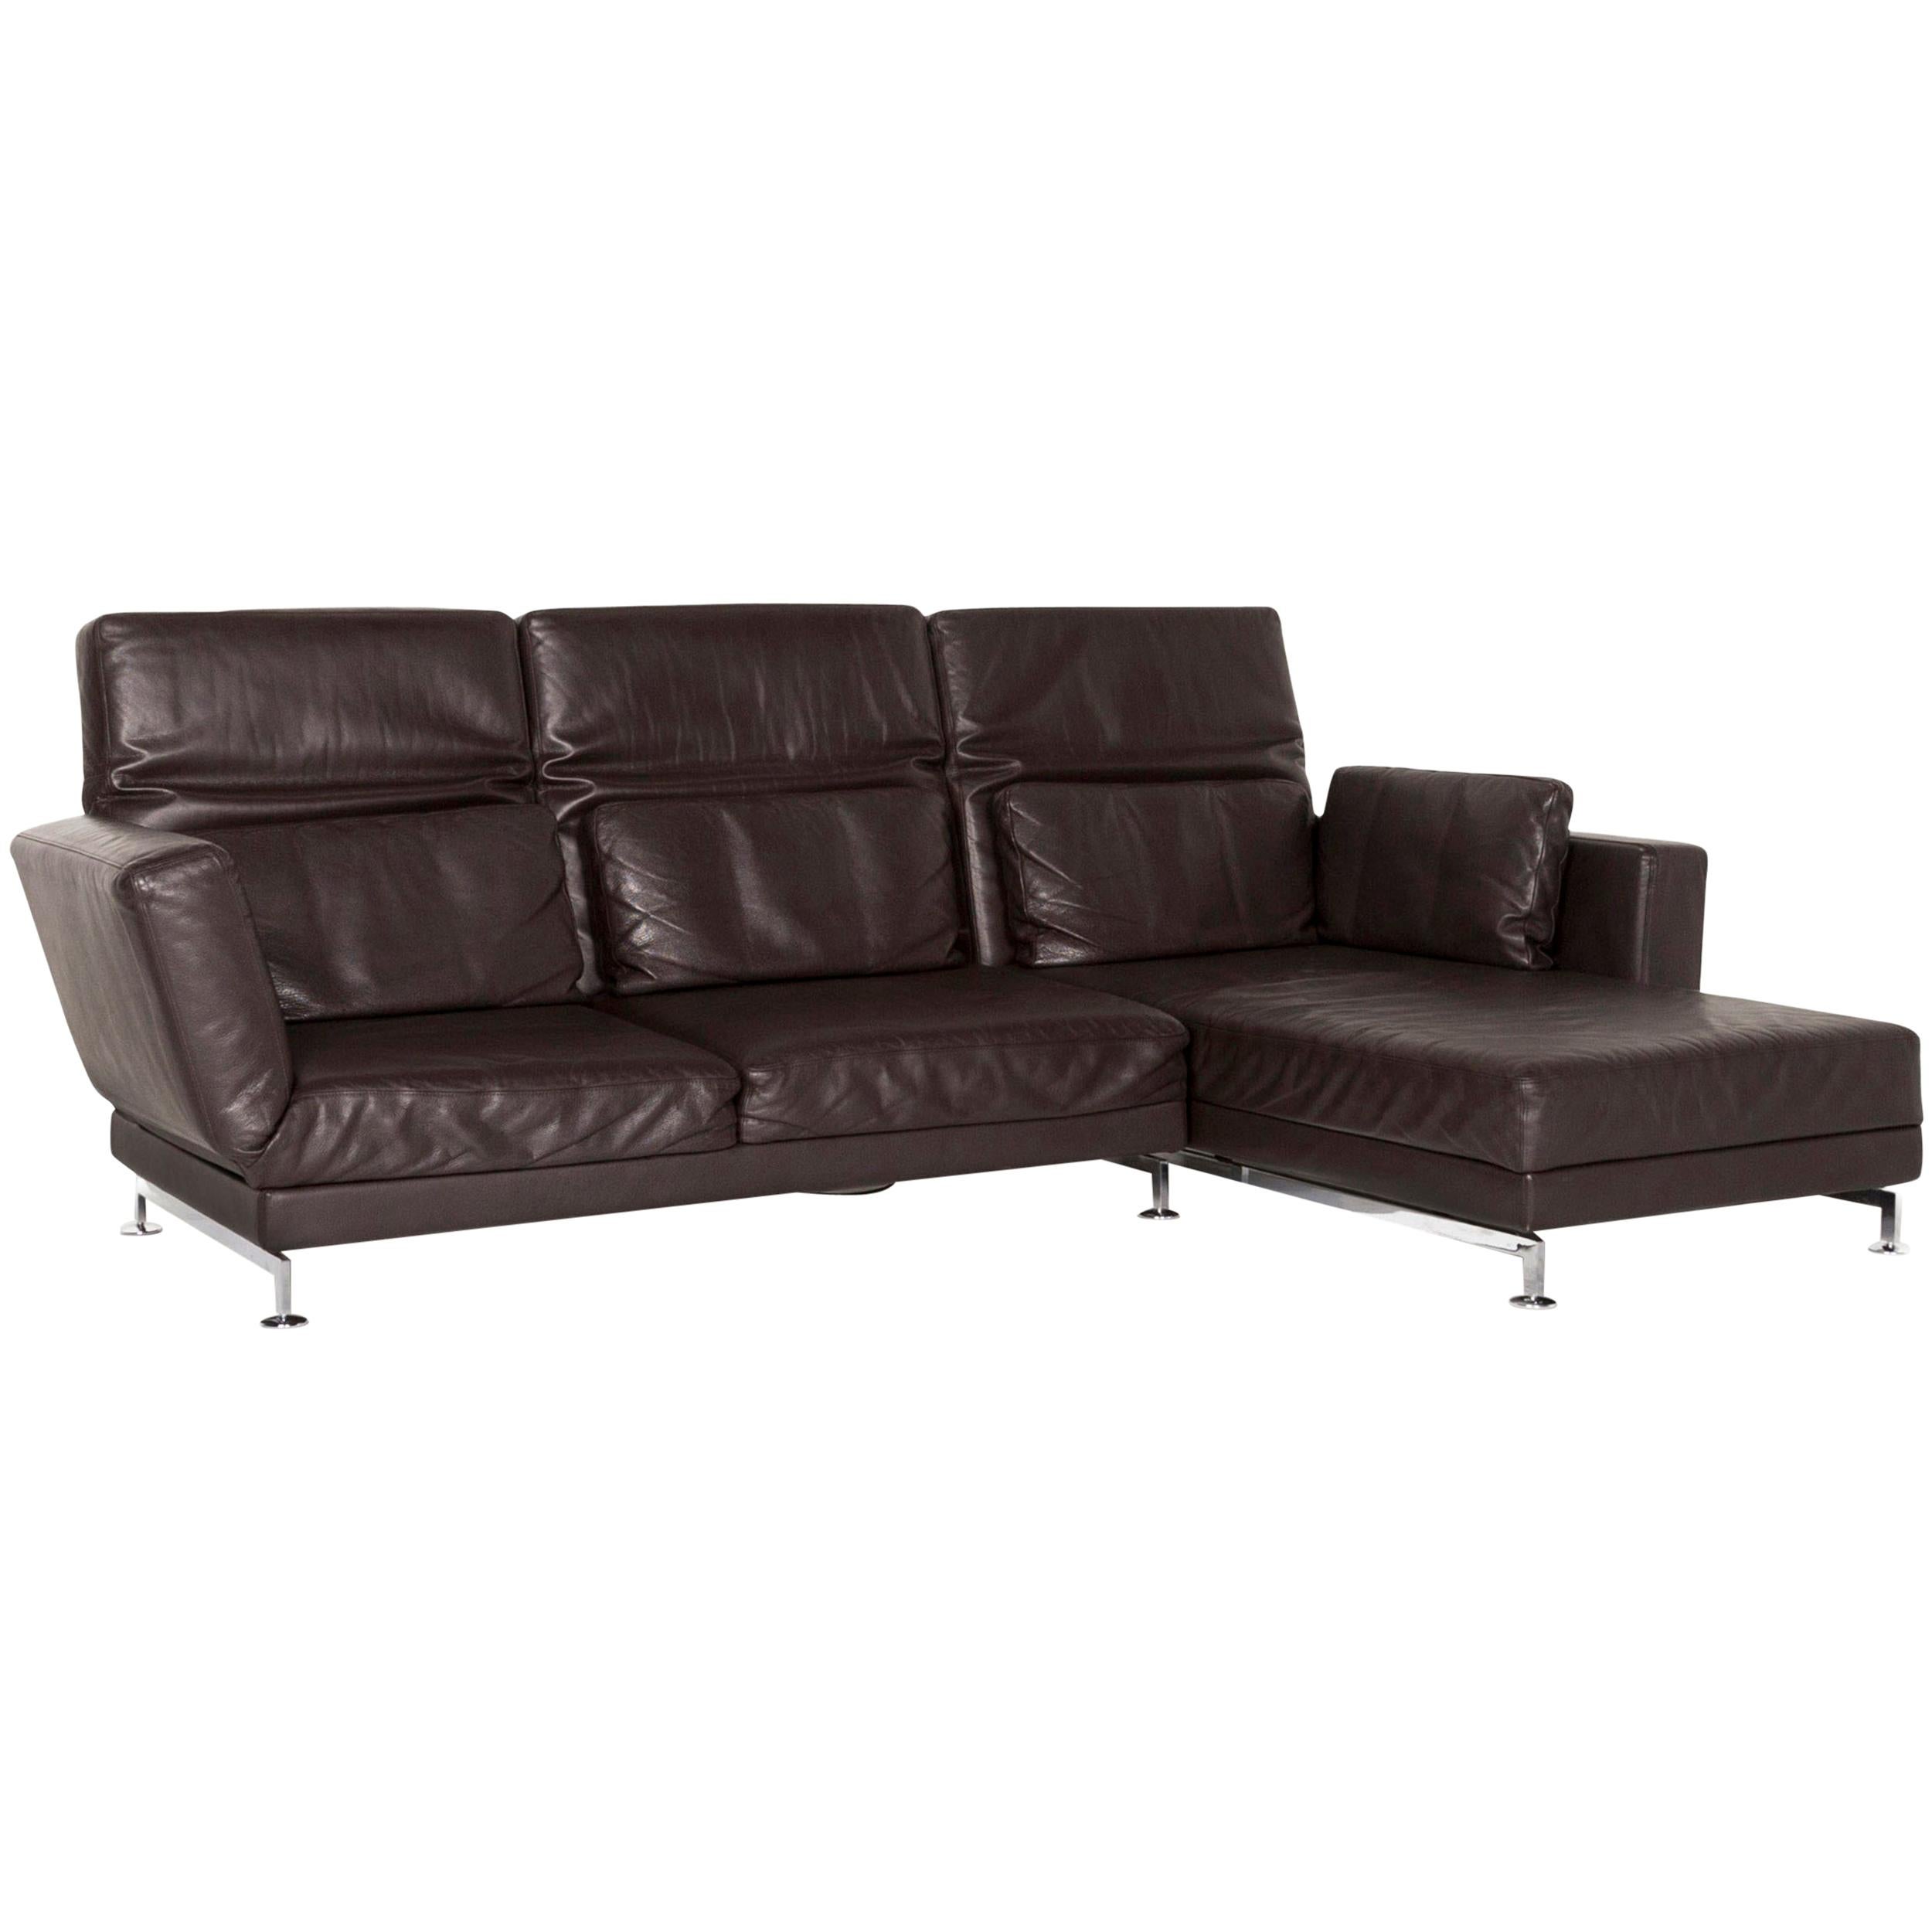 Brühl & Sippold Moule Leather Corner Sofa Brown Sofa Function Relax Function For Sale